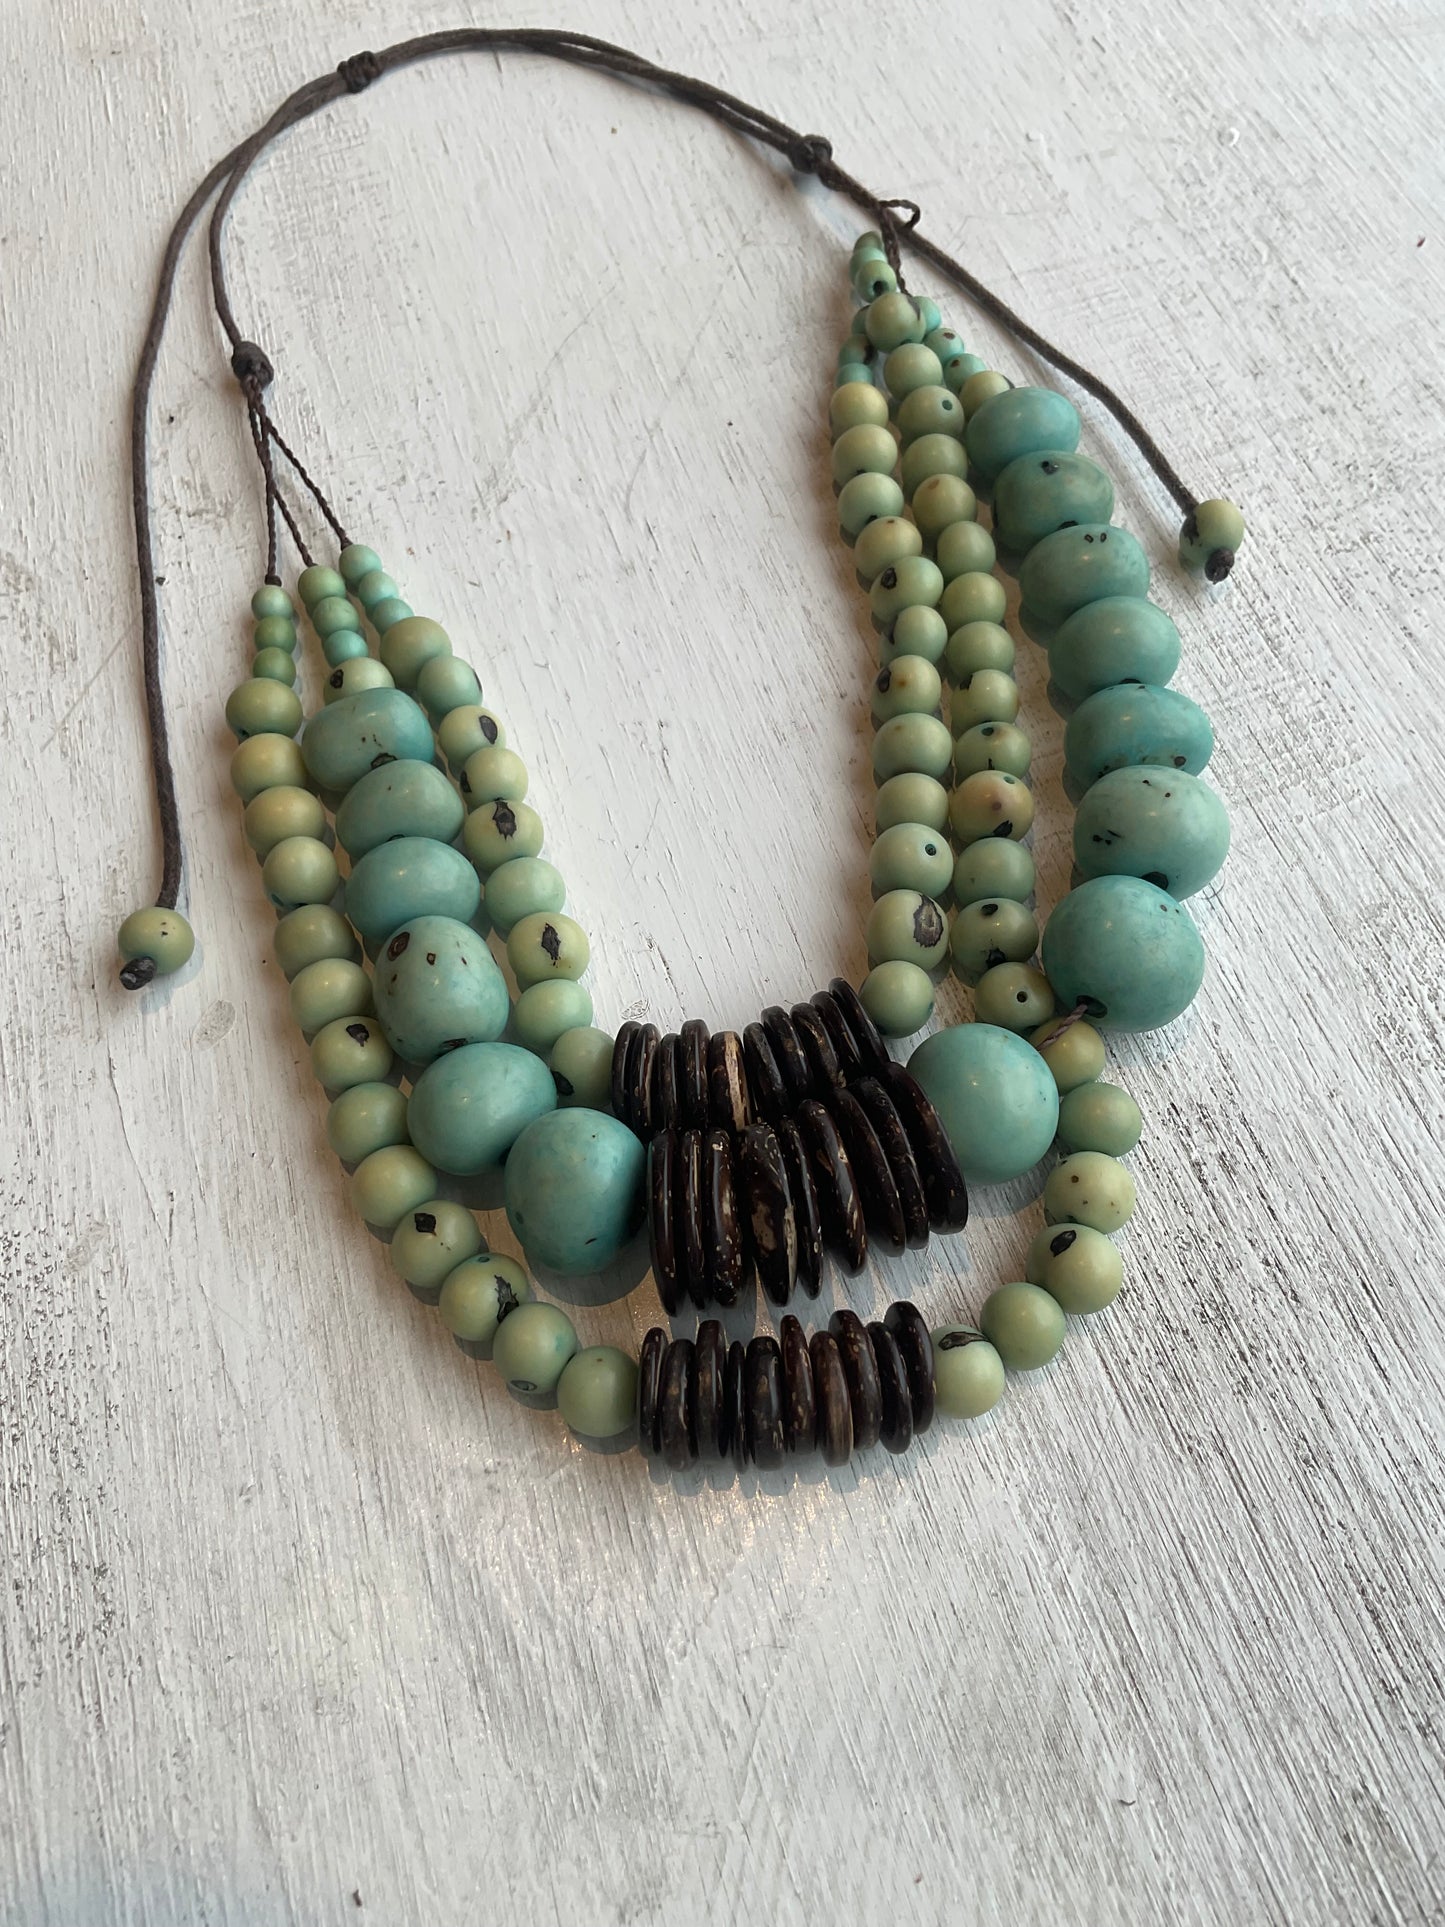 Aqua Seeds & Nuts Necklace on Cording